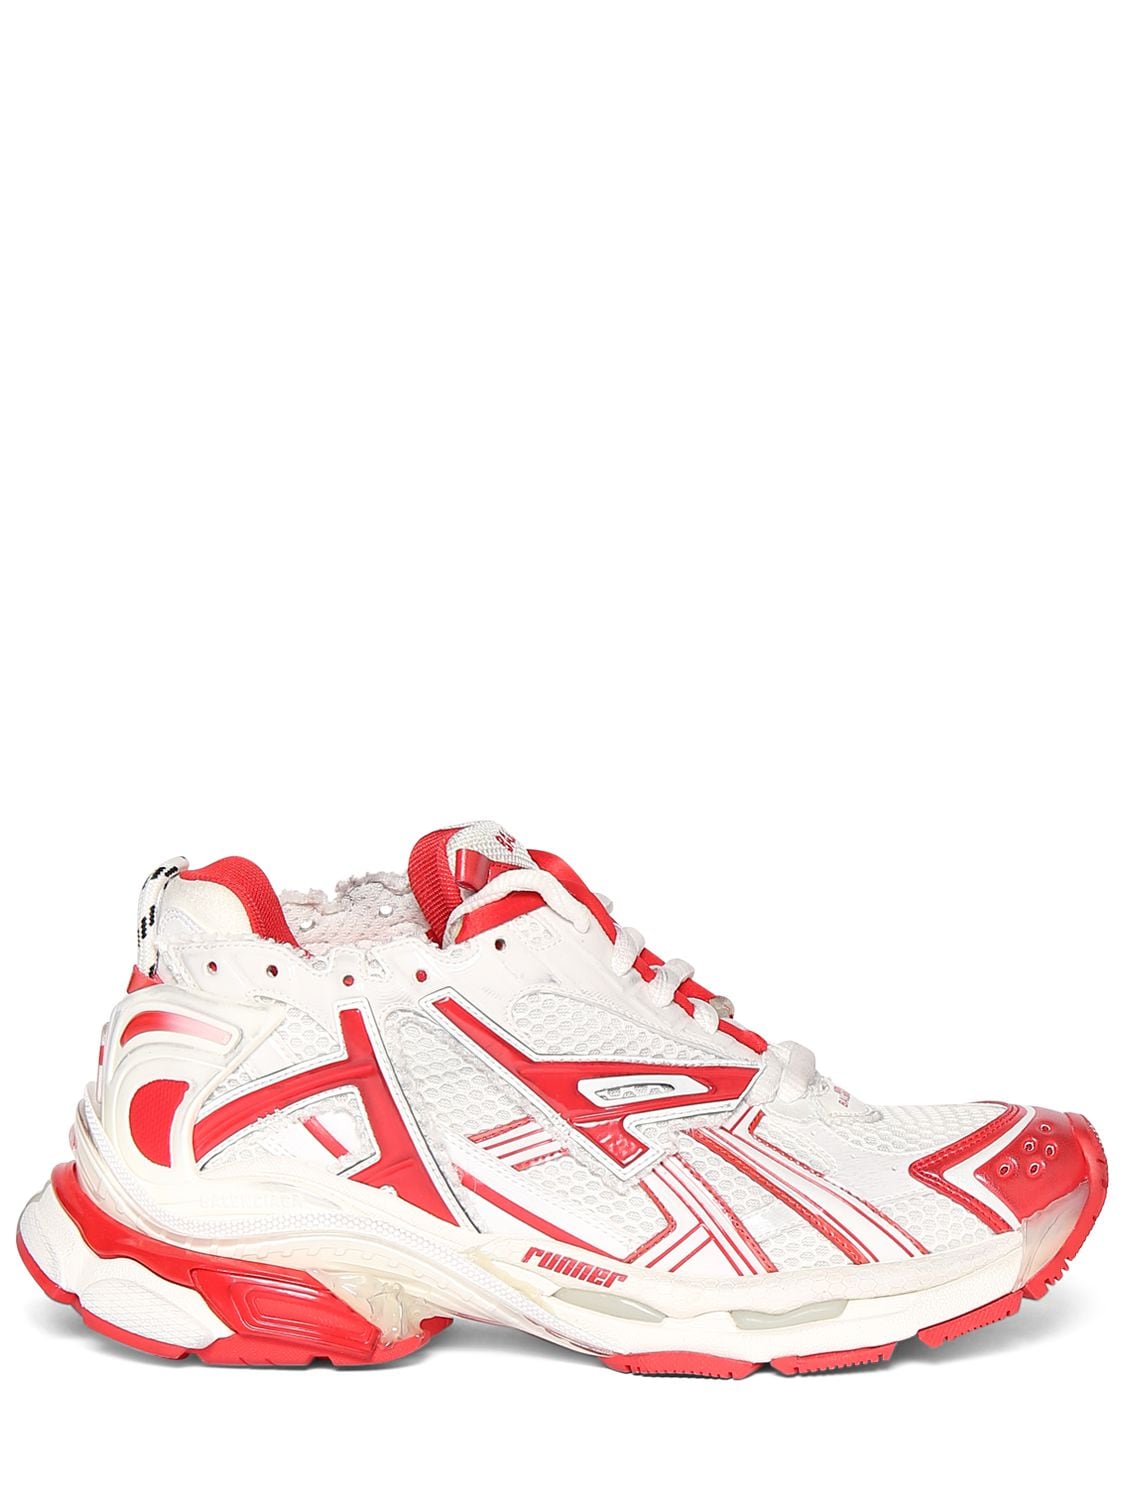 Balenciaga Runner Sneakers In White Red